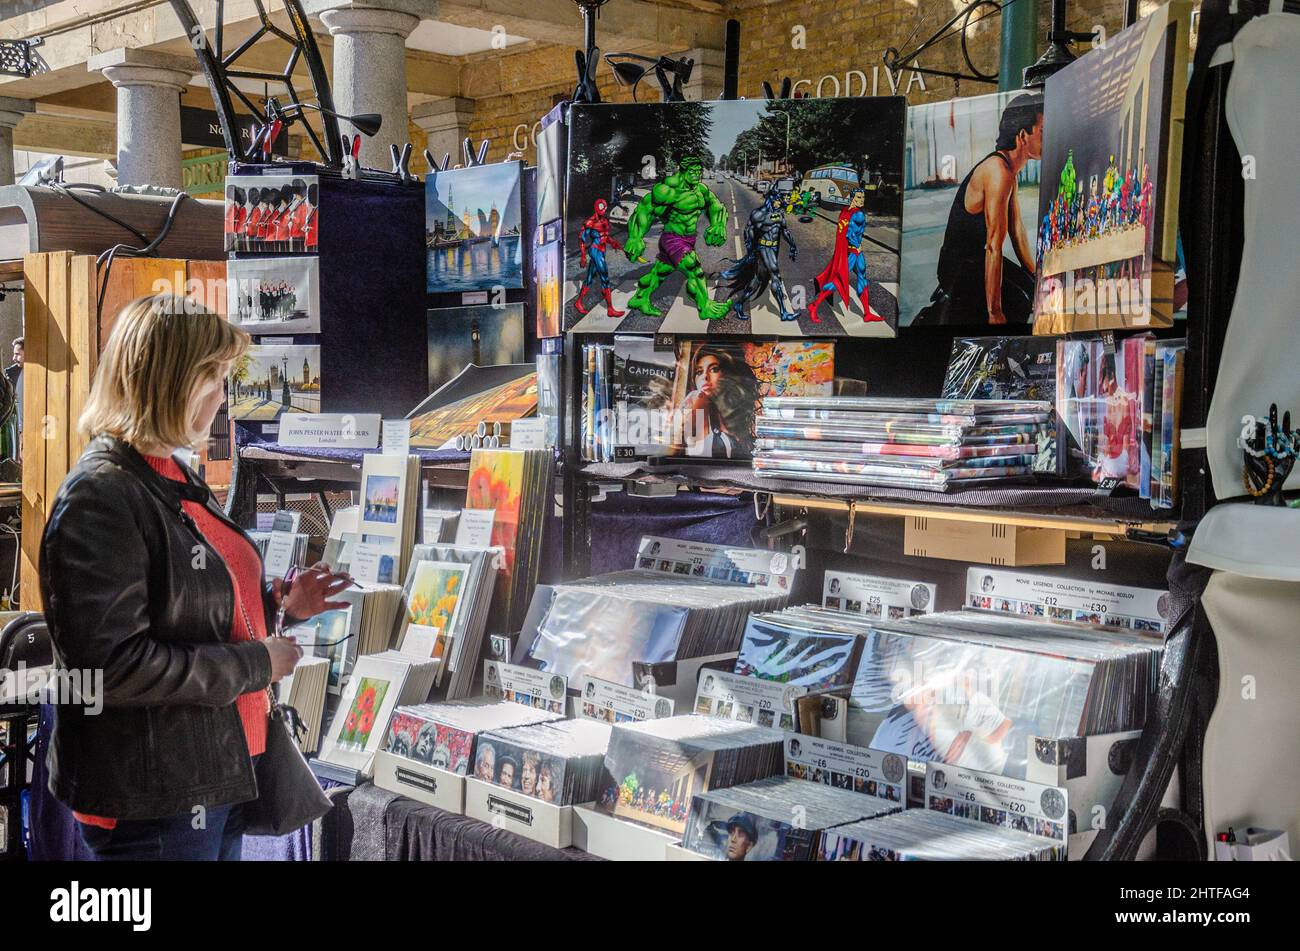 A woman browsing the prints and artwork on display at a stall in The Apple Market in Covent Garden, London, UK Stock Photo